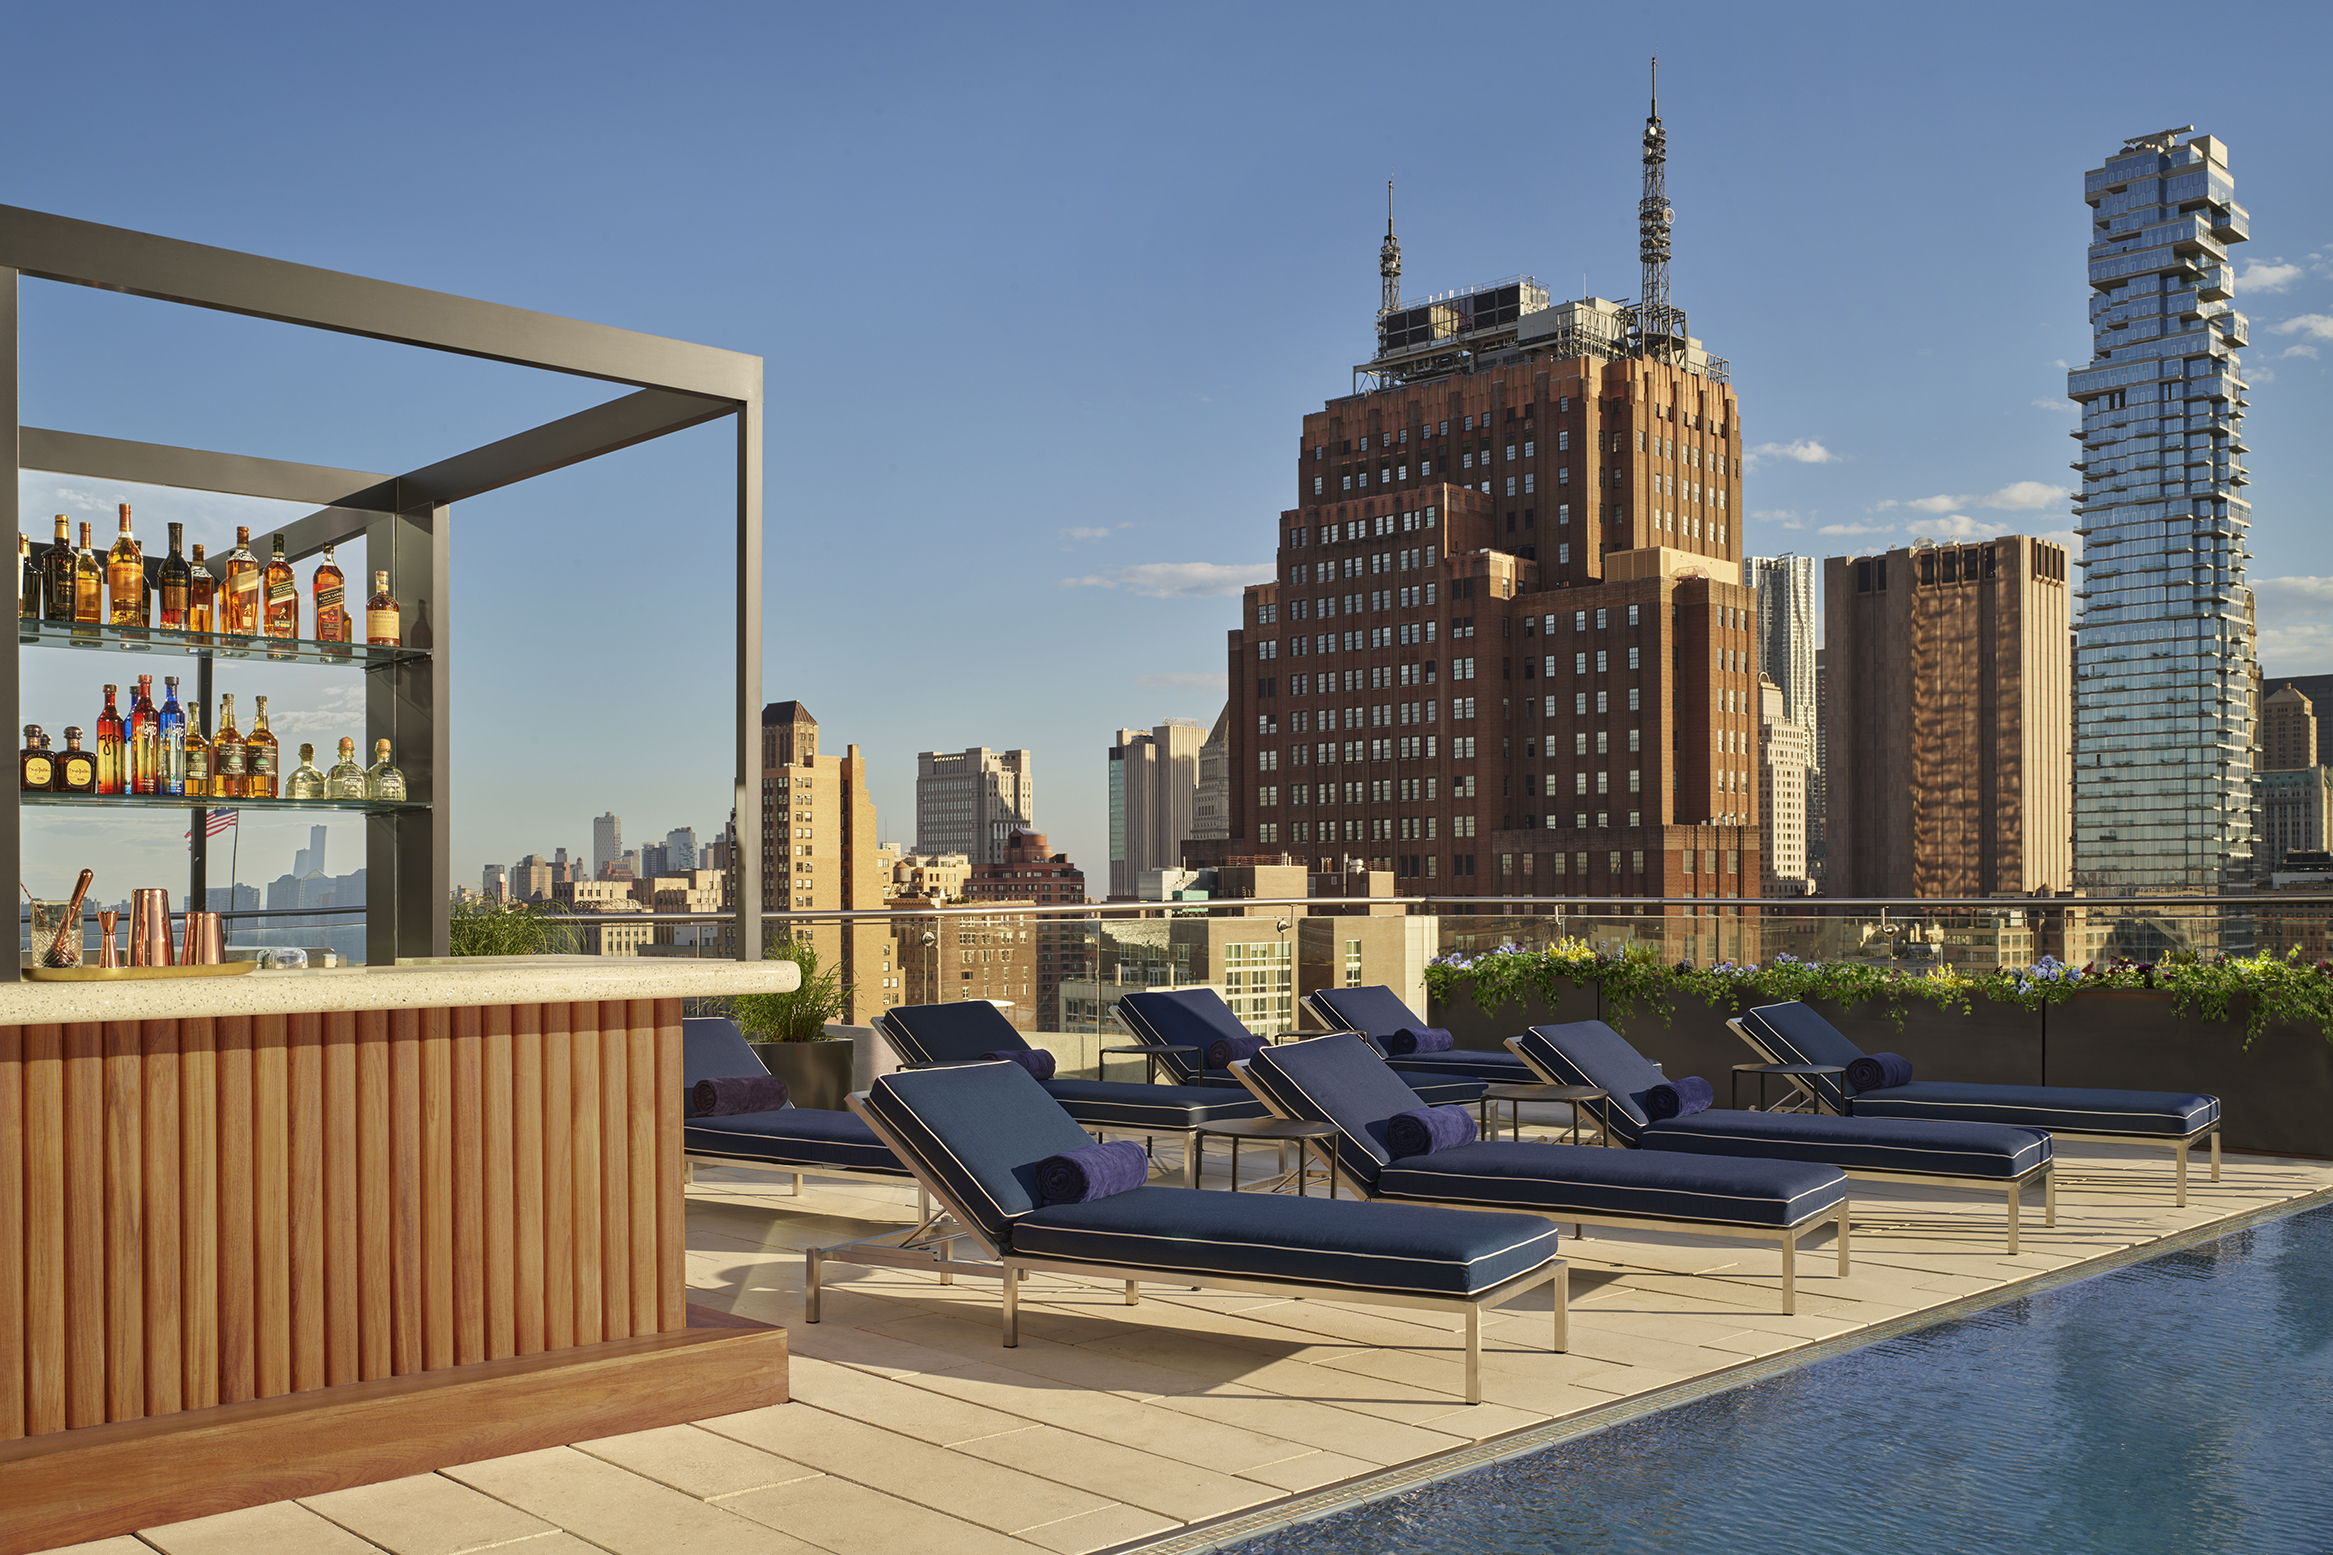 The rooftop Jimmy bar at the Modernhaus Soho, now featuring an outdoor bar